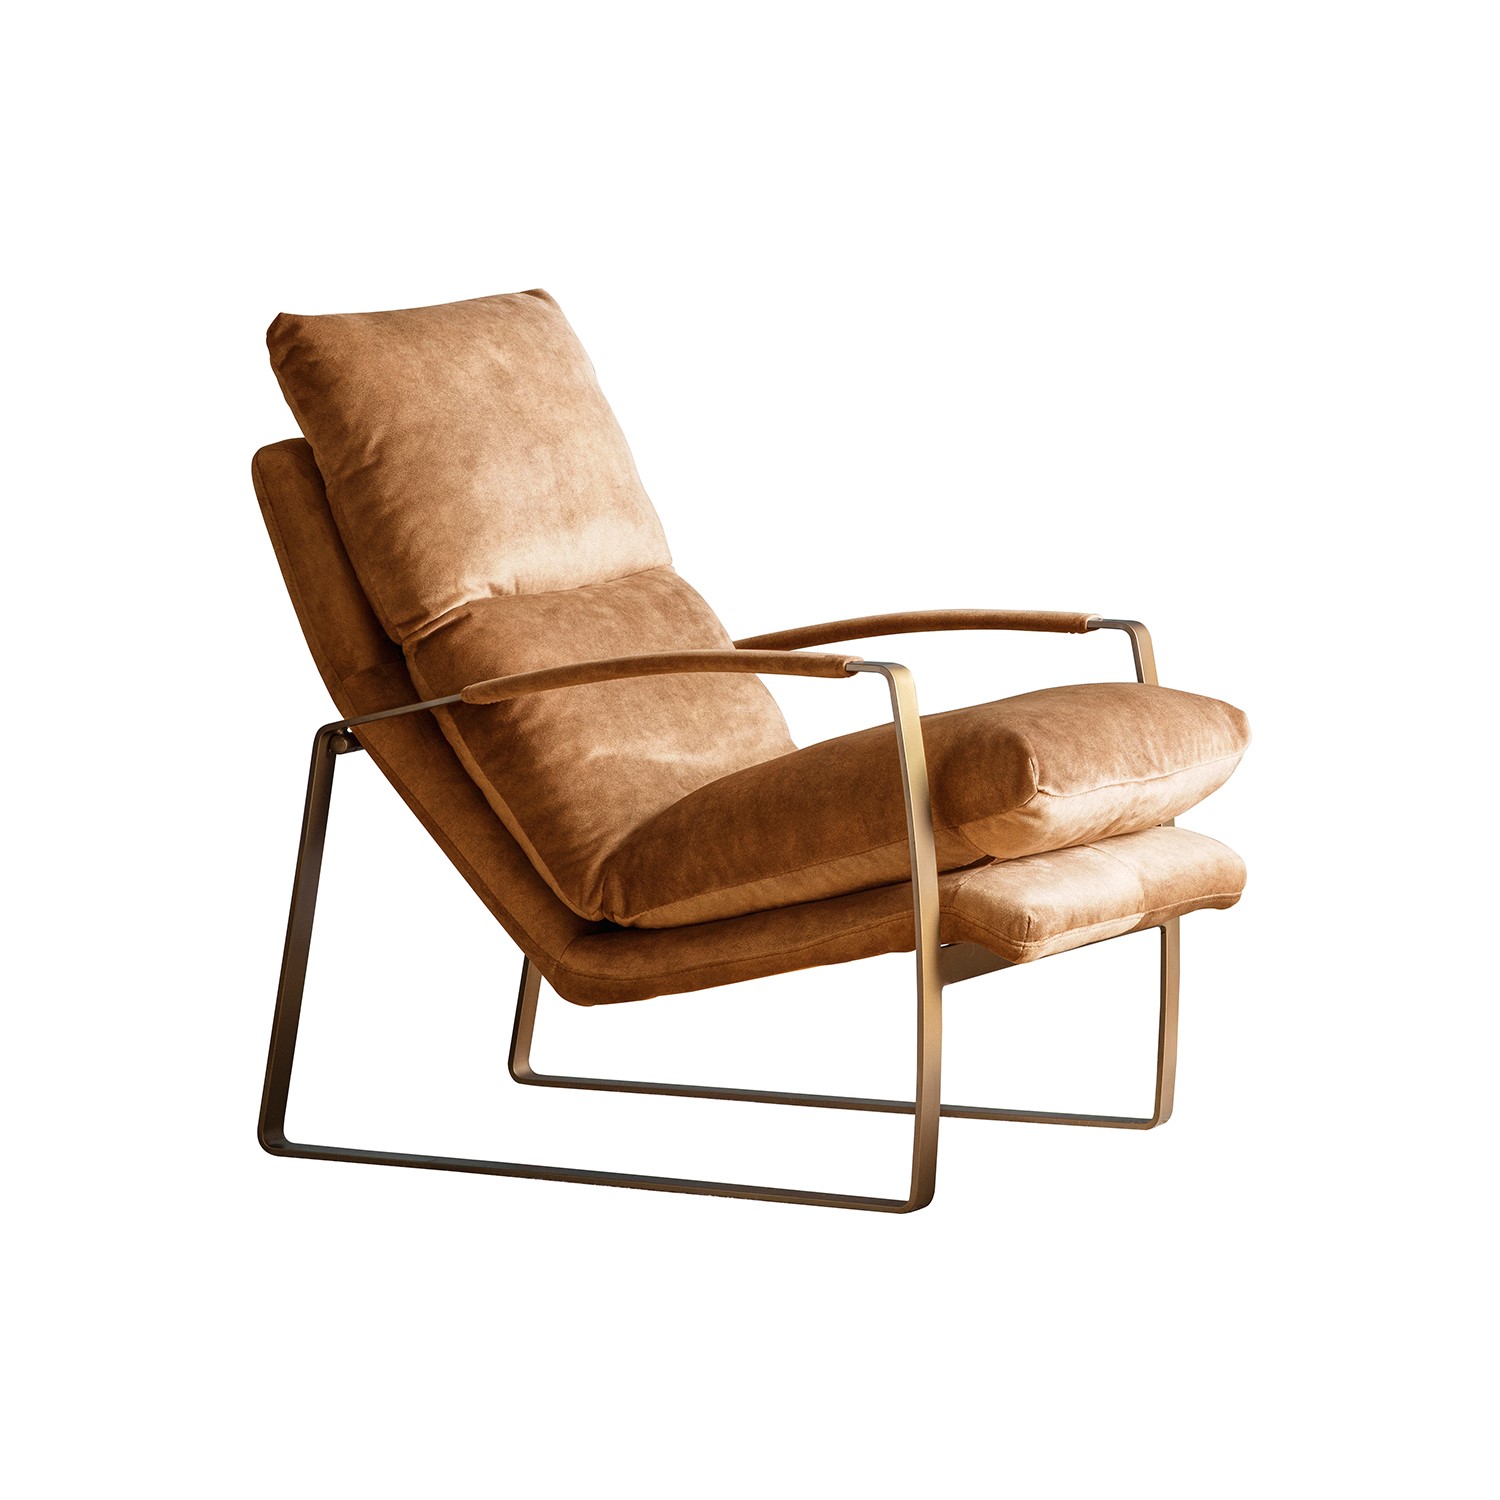 Read more about Tan leather armchair with gold frame fabien gallery